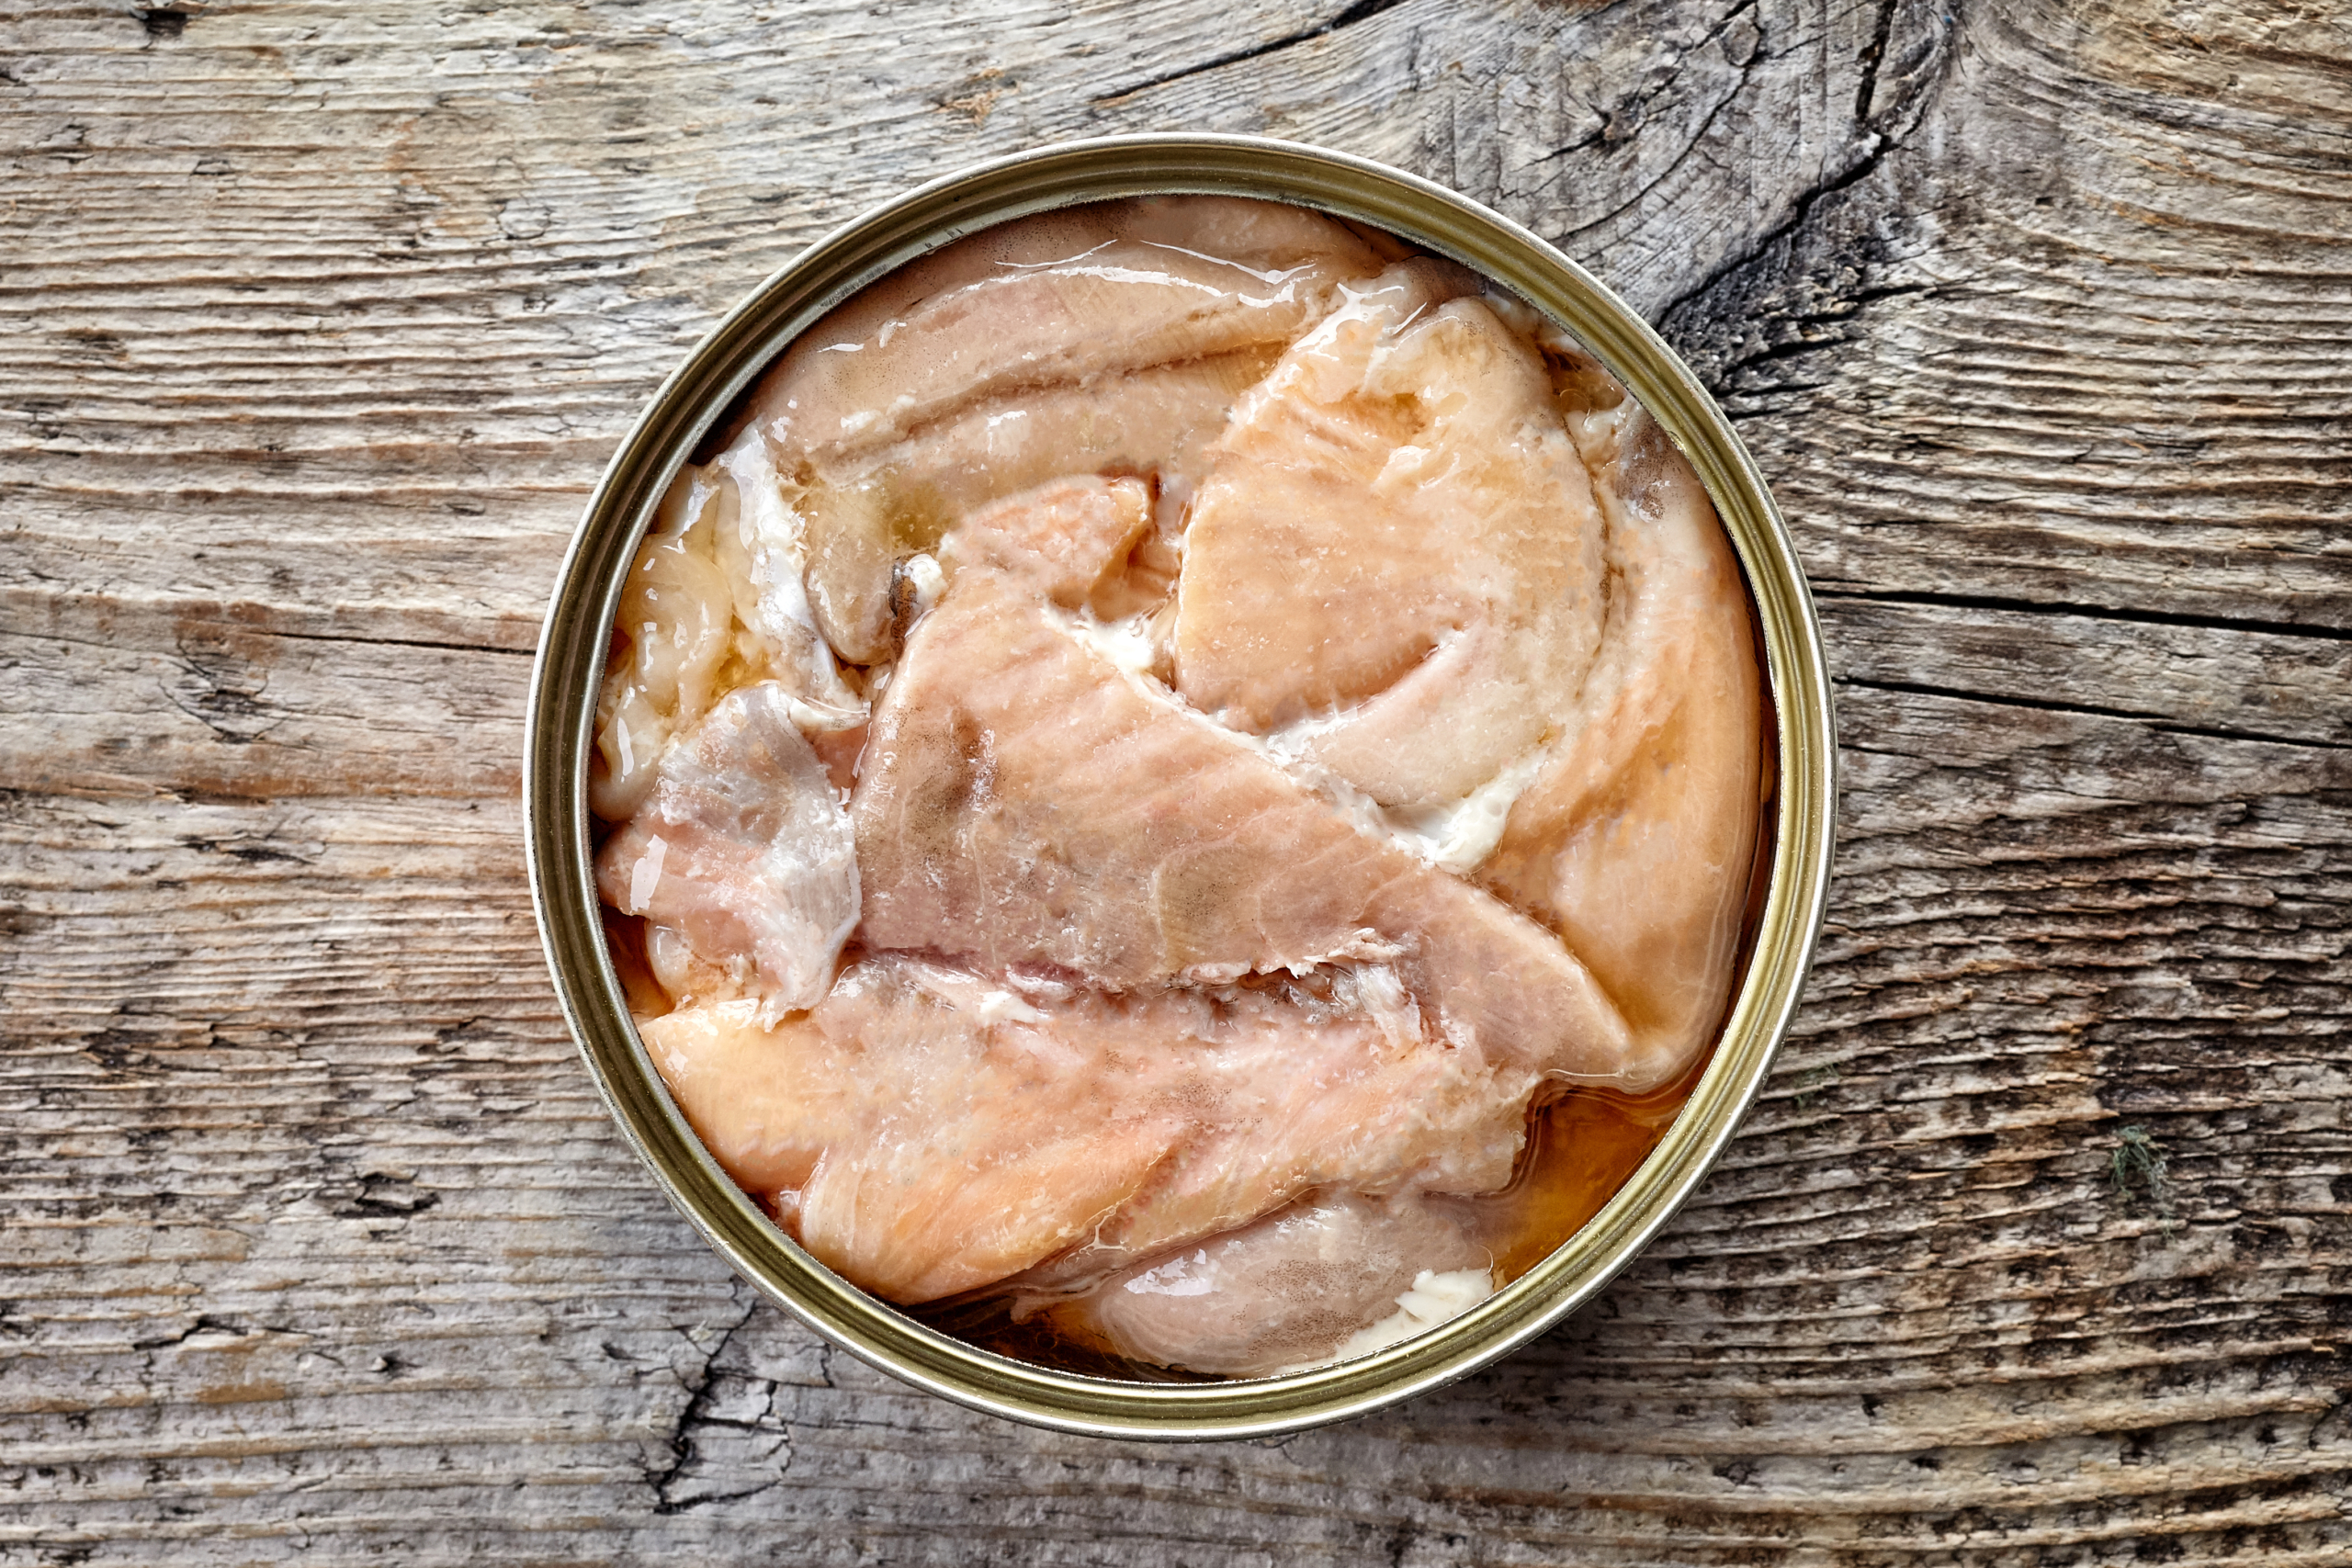 Is Your Favorite Canned Tuna Brand Part of the Solution for Our